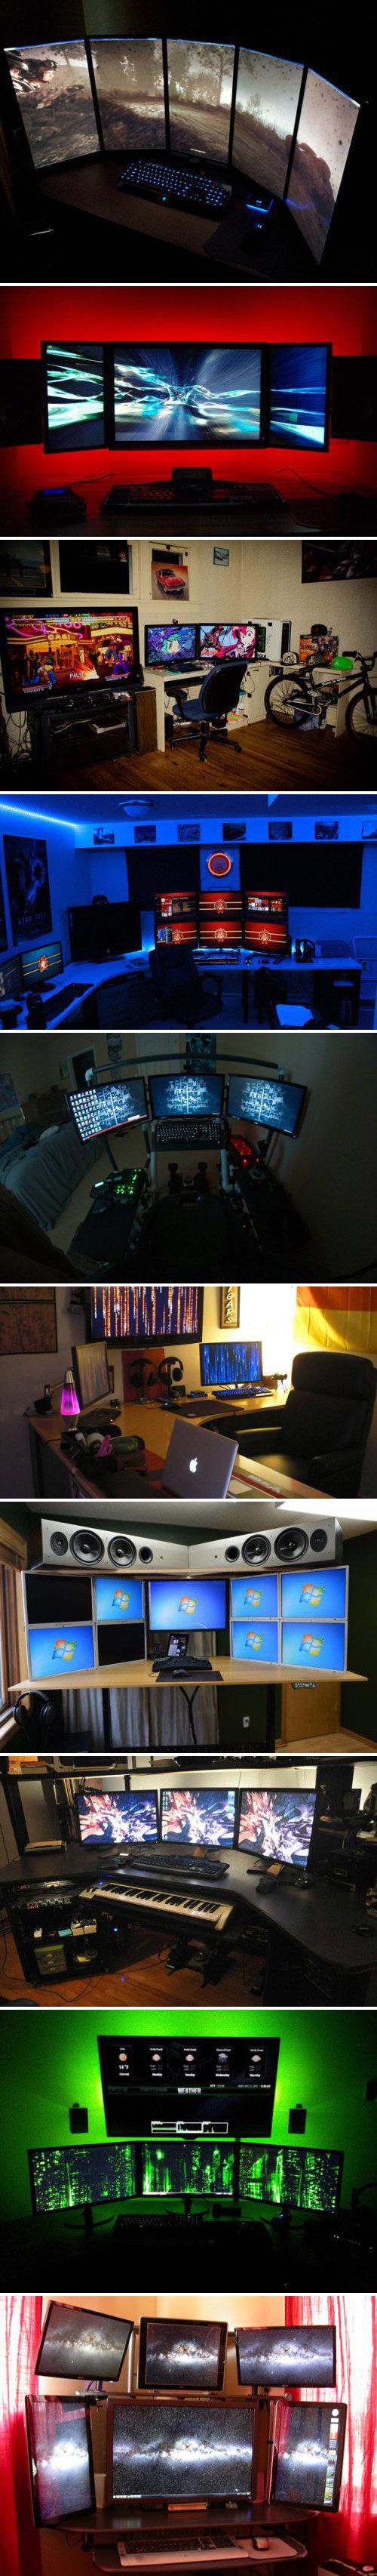 Here are 10 more cool and creative computer setups that geeks would love.